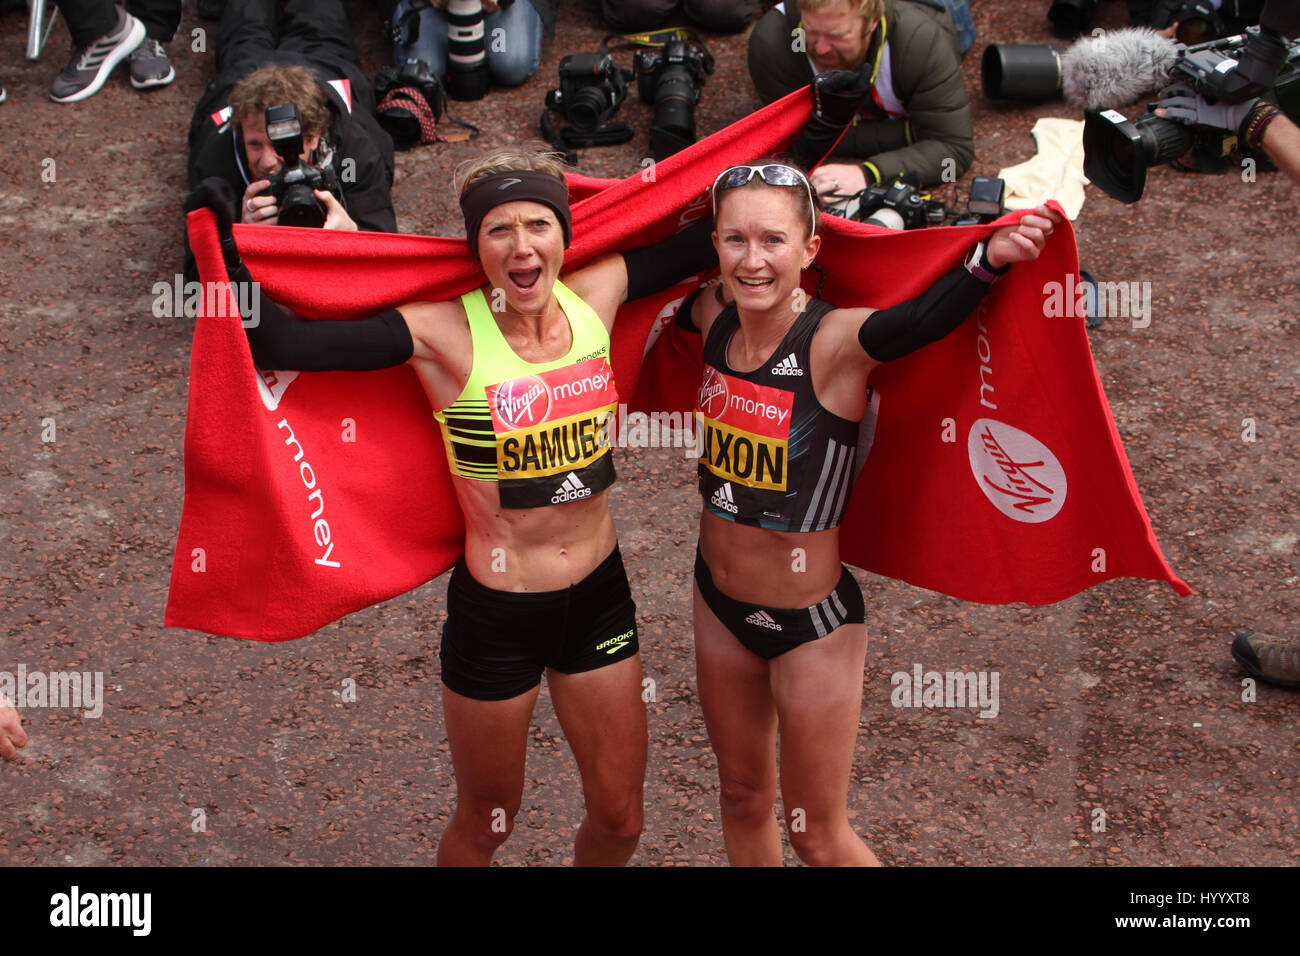 London, UK 24 April 2016. Sonia Samuels and Dixon the second and first place UK runners to finish the Virgin Money London Marathon. The men's course records is 2:04:29 (2014), held by Wilson Kipsang and women's: 2:15:25 (2003) held by Paula Radcliffe. © David Mbiyu/Alamy Live News Stock Photo